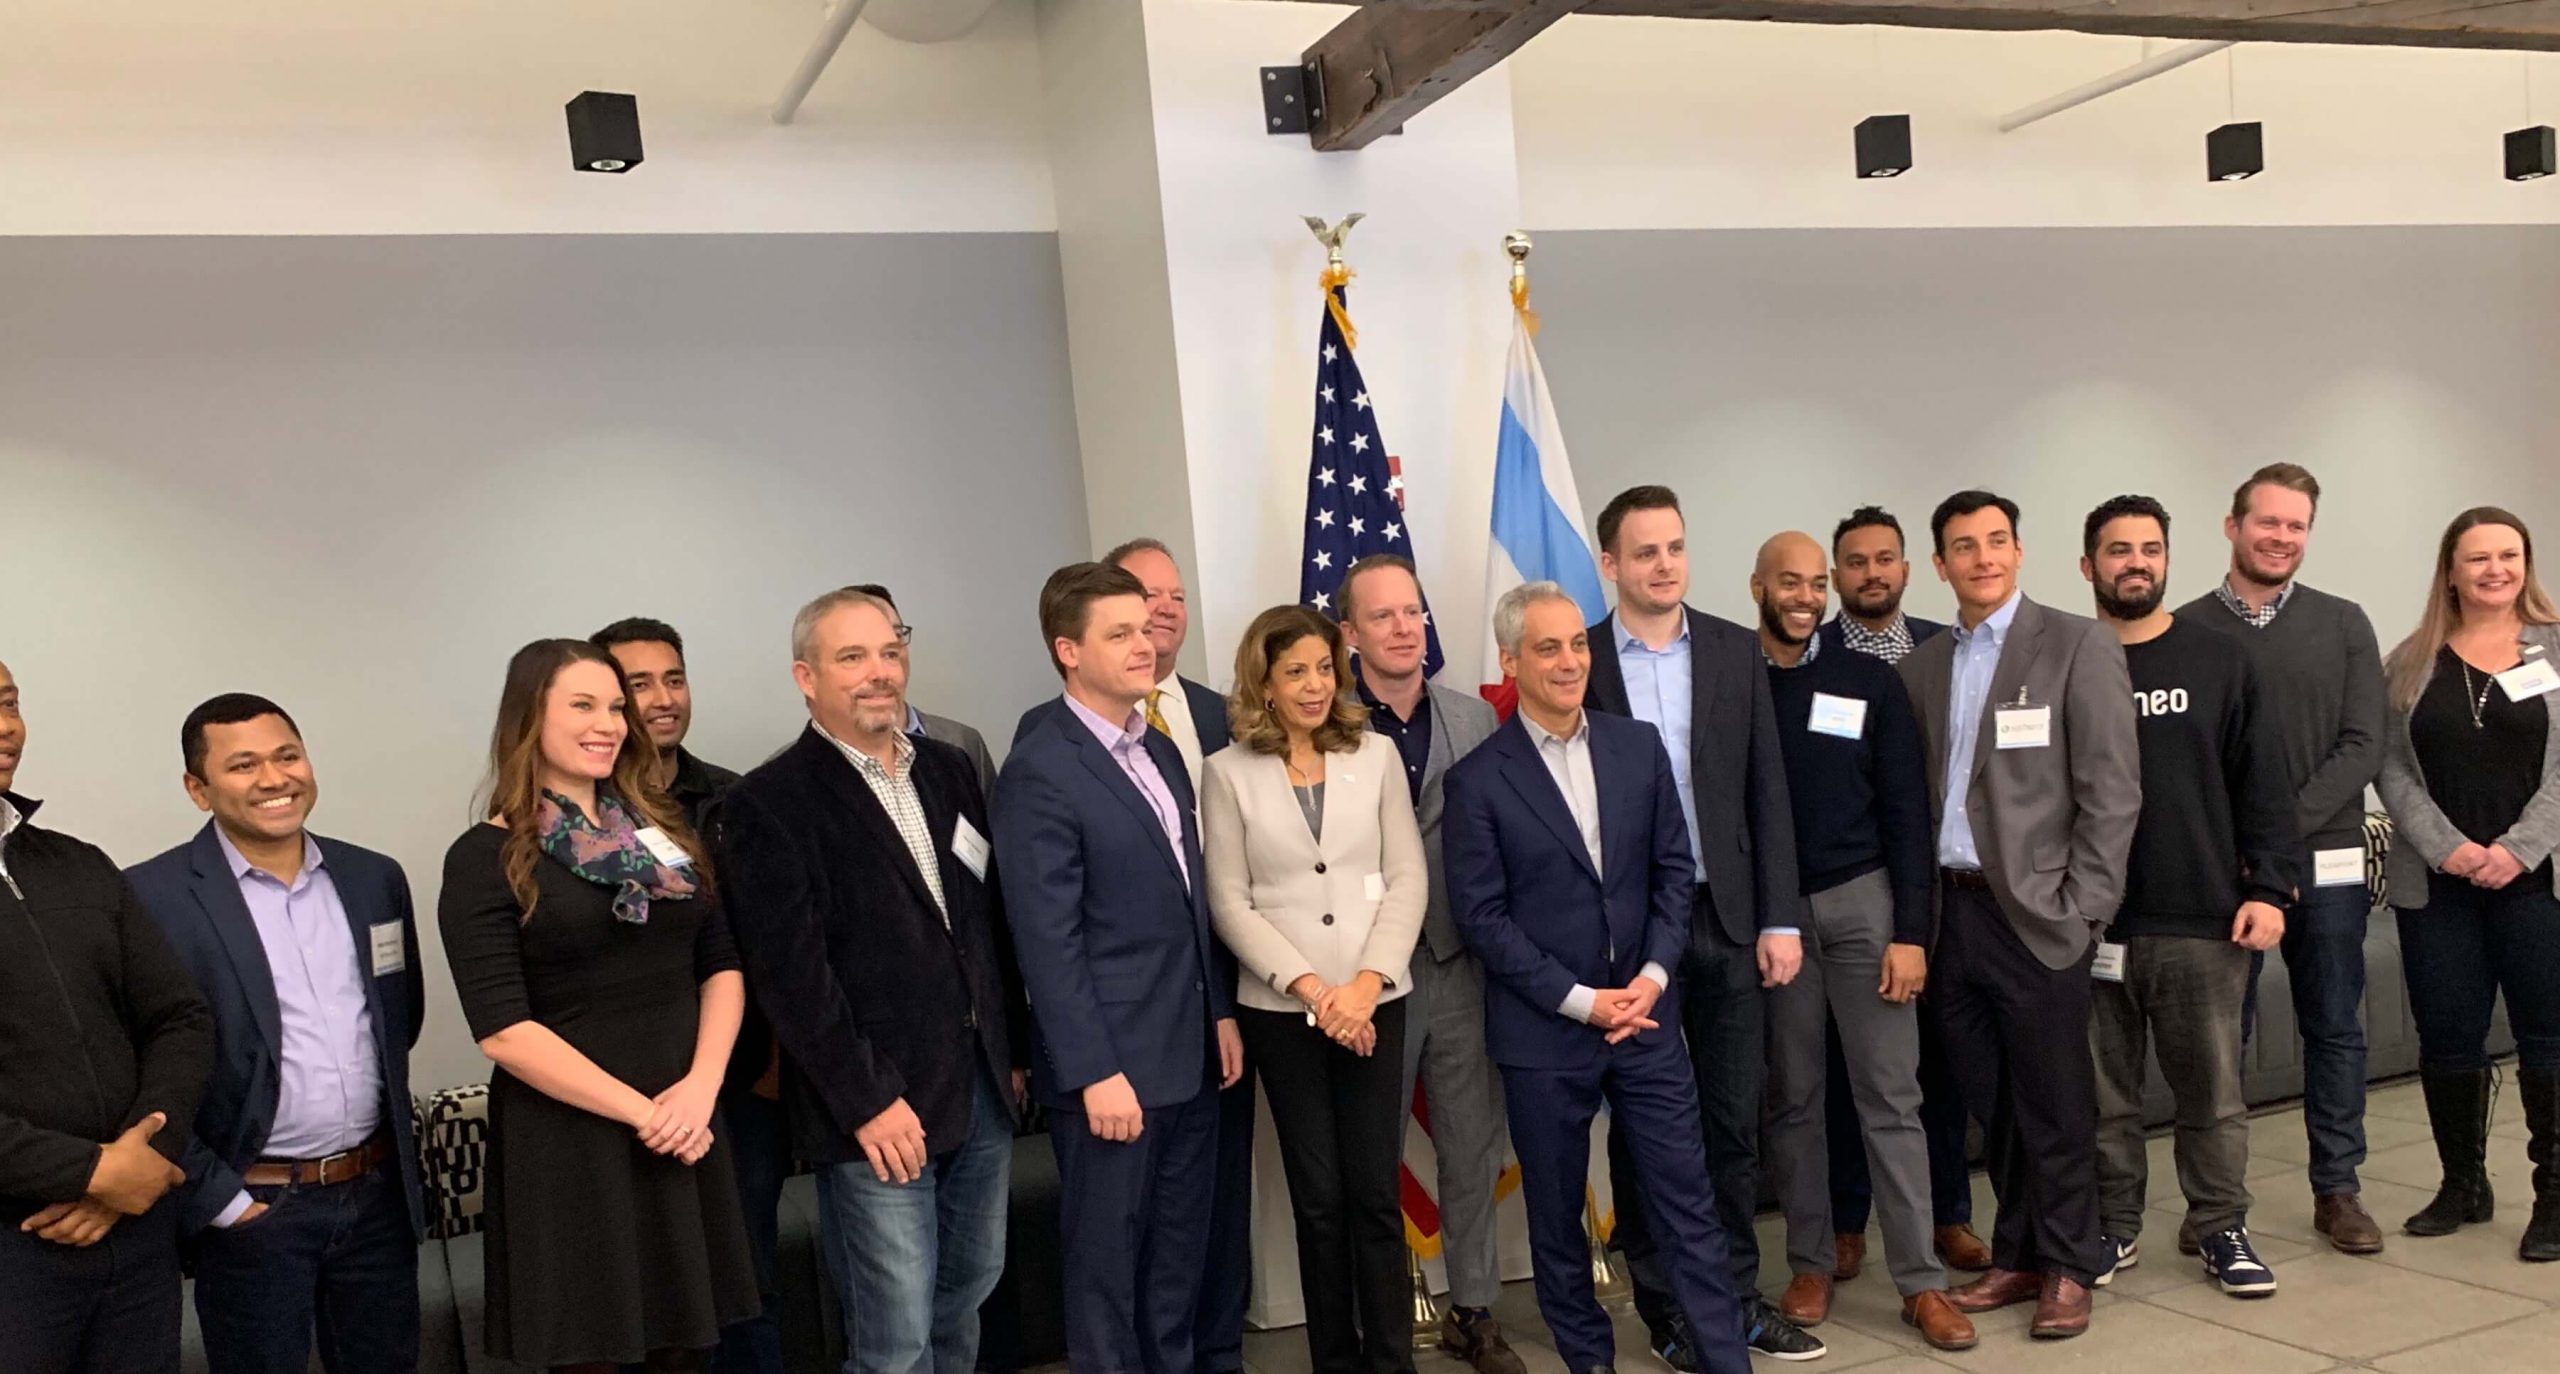 City of Chicago Taps Sphera as a Top Recruiter at Tech Day Event